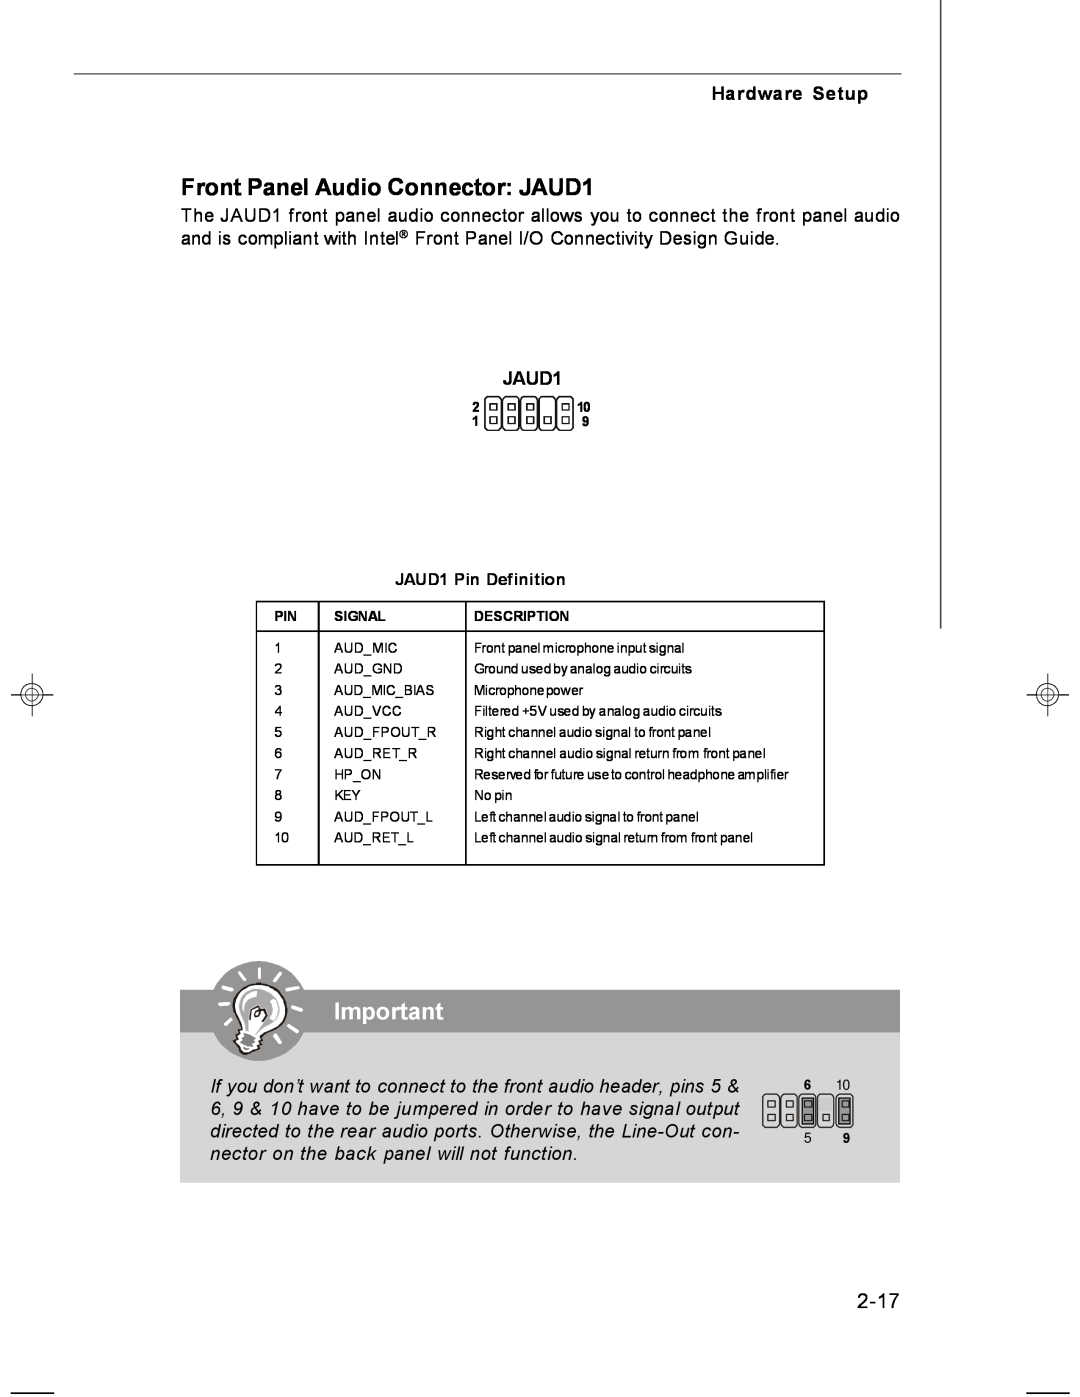 MSI MS-7255 manual Front Panel Audio Connector JAUD1, 2-17, Hardware Setup, JAUD1 Pin Definition, Signal, Description 